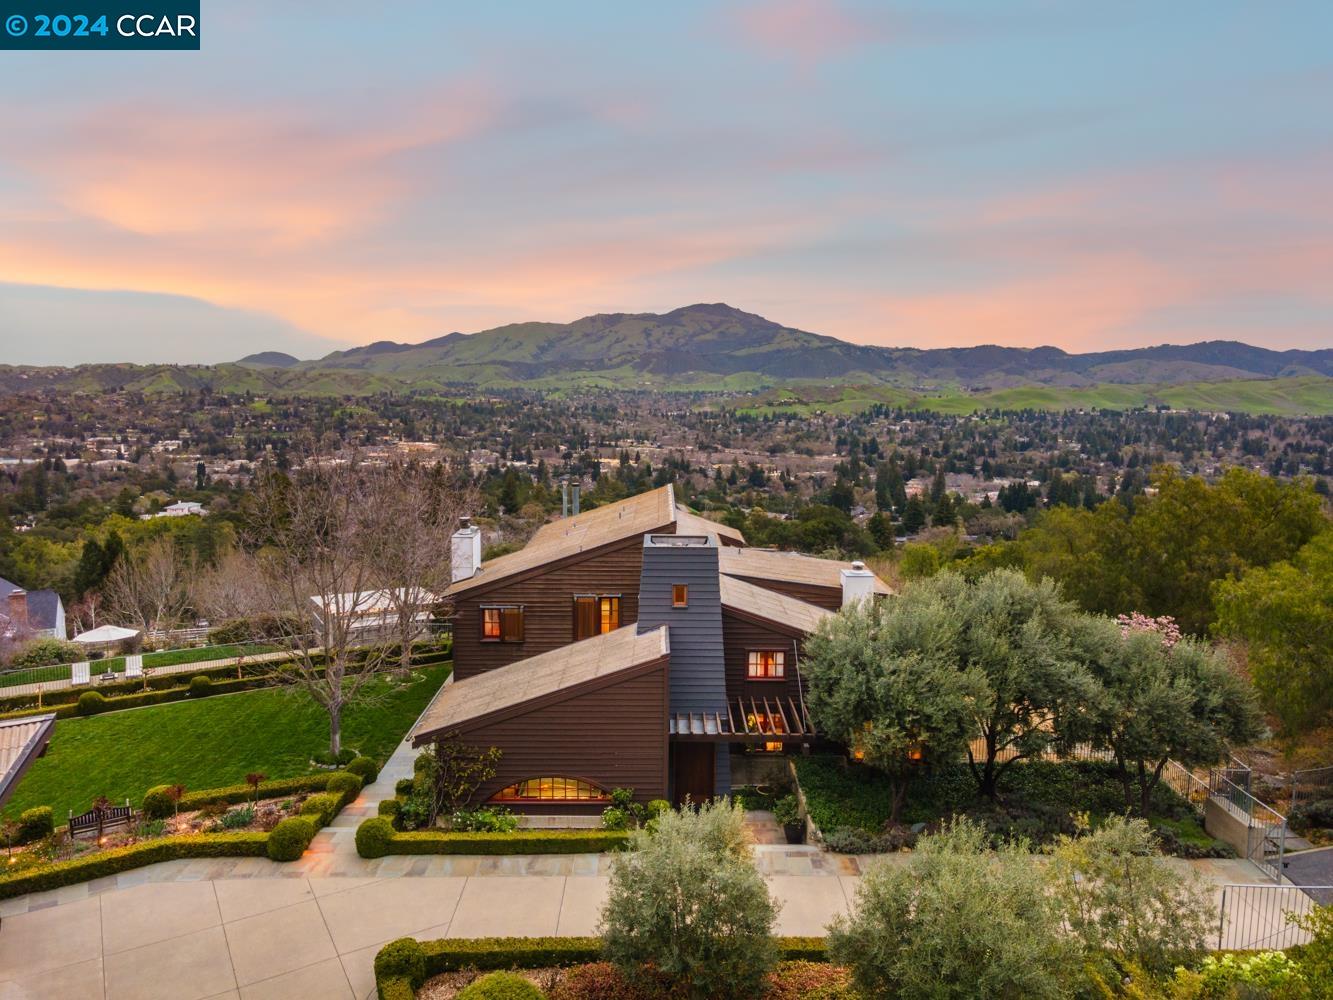 This Westside Danville, entirely custom-built residence transcends the ordinary. Nestled on 3.5+ acres & mere steps from Las Trampas open space trails, offering unobstructed views of Mt Diablo that follow you from room to room while the meticulously landscaped grounds attempt to steal the limelight. A blend of Modern, Craftsman & Mid-century styles - pine plank floors, plaster wall coatings, & exposed concrete offer grounded elegance. Clear cedar, Douglas-fir timbers, & heart redwood custom-milled exterior doors, windows, & interior paneling are used throughout. The main level offers a formal living room, formal dining room serviced through a butler's pantry, chef's kitchen with top of the line appliances, family room with panoramic views, billiards room & guest room/bath. Upper level is comprised of the primary suite, 2 secondary bedrooms with a shared hallway bath & a quiet library/loft. The final interior elements include a large, projector-ready home theatre, & a concealed but walk-in tech closet which serves every Ethernet, coaxial, telephone, & speaker cable in the house. Stepping outdoors, a pristine pool & spa with a dedicated bath house offer the perfect place to unwind & soak up the California sunshine. Welcome to 575 Highland Drive, an unreplicable legacy home!